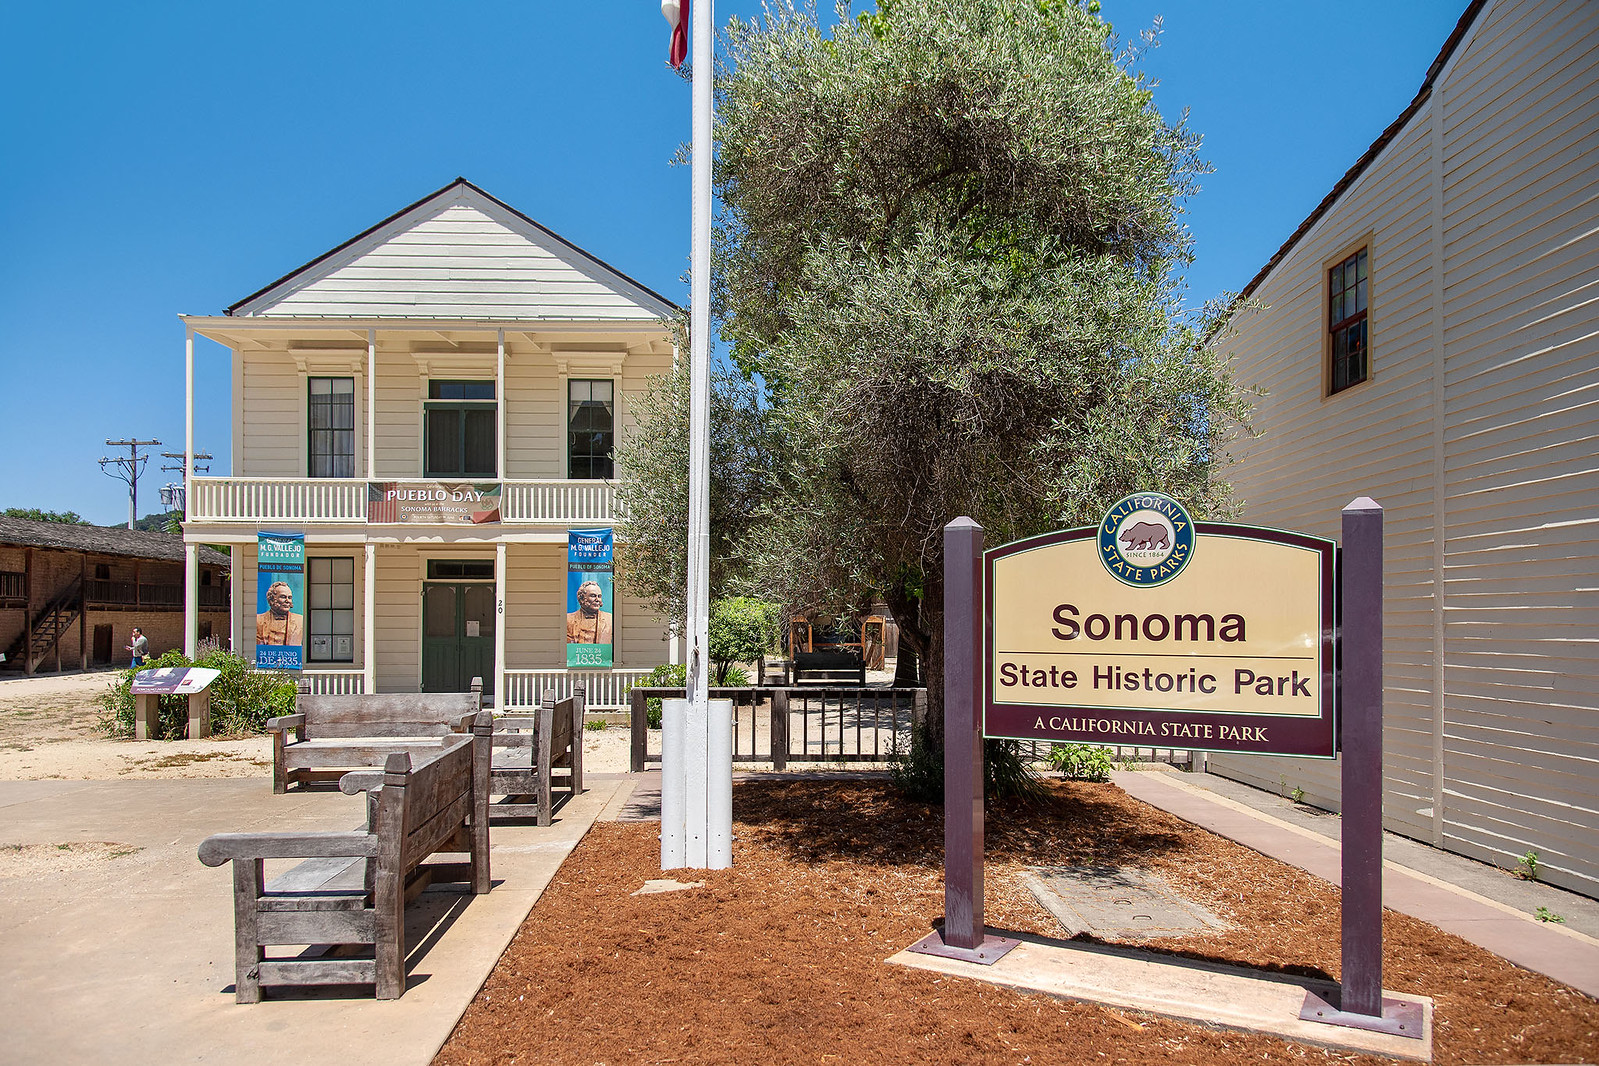 Cover Image for 101 Adobe Way, Sonoma presented by Daniel Casabonne